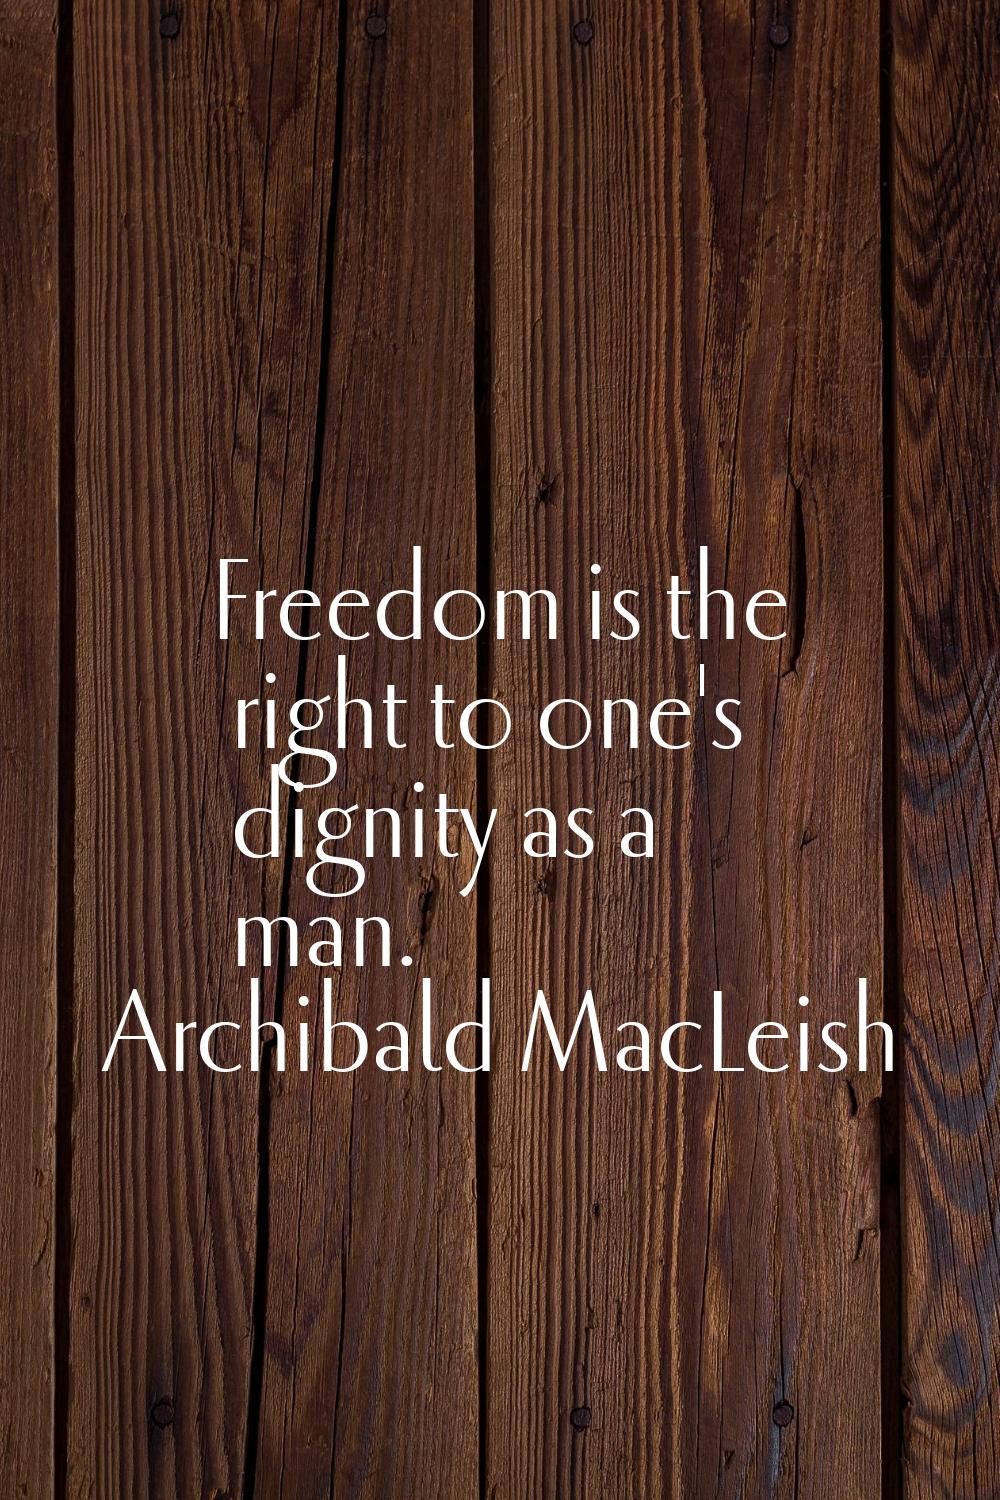 Freedom is the right to one's dignity as a man.